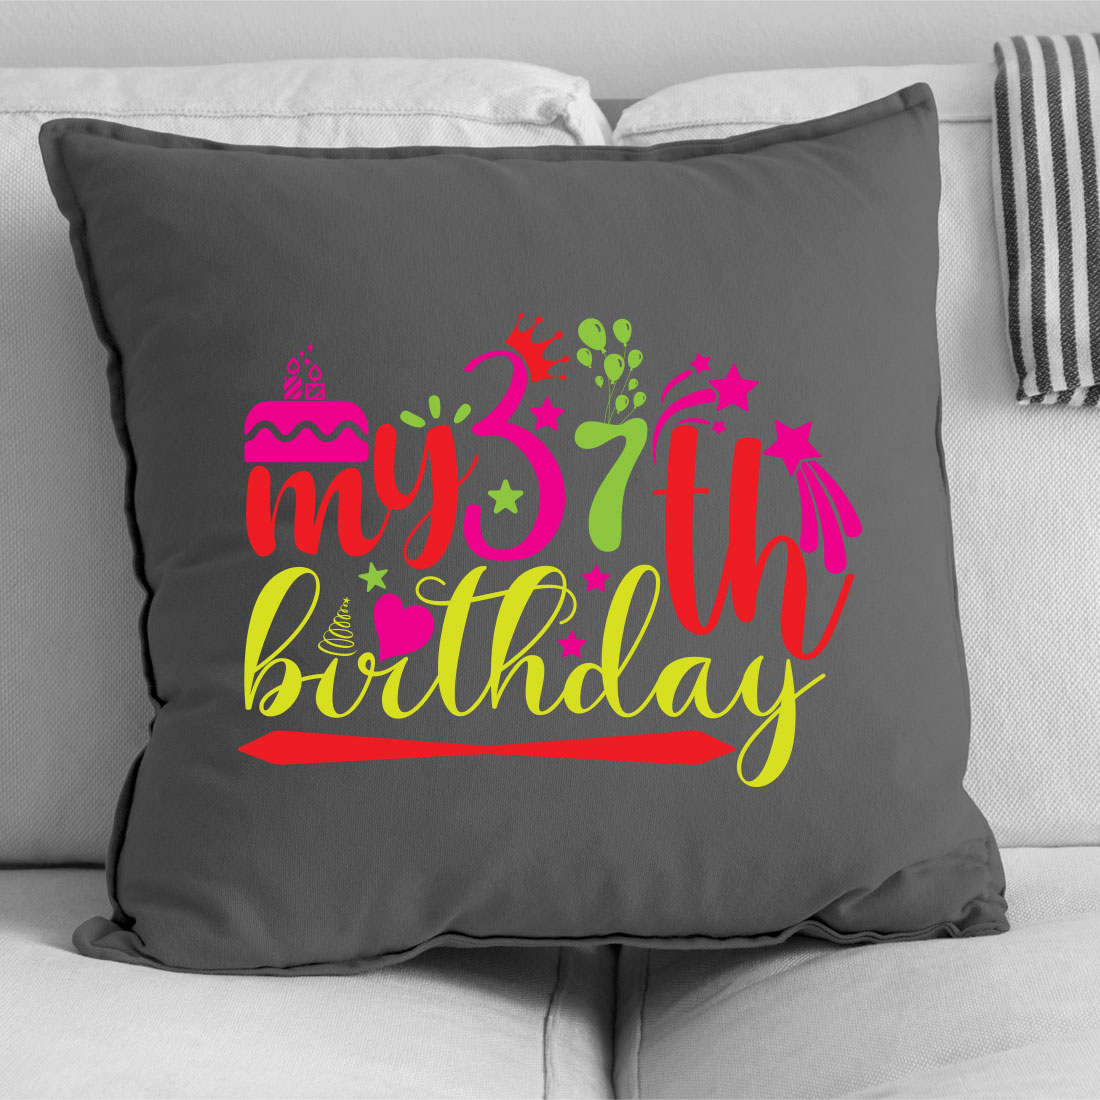 Pillow that says my 7th birthday on it.